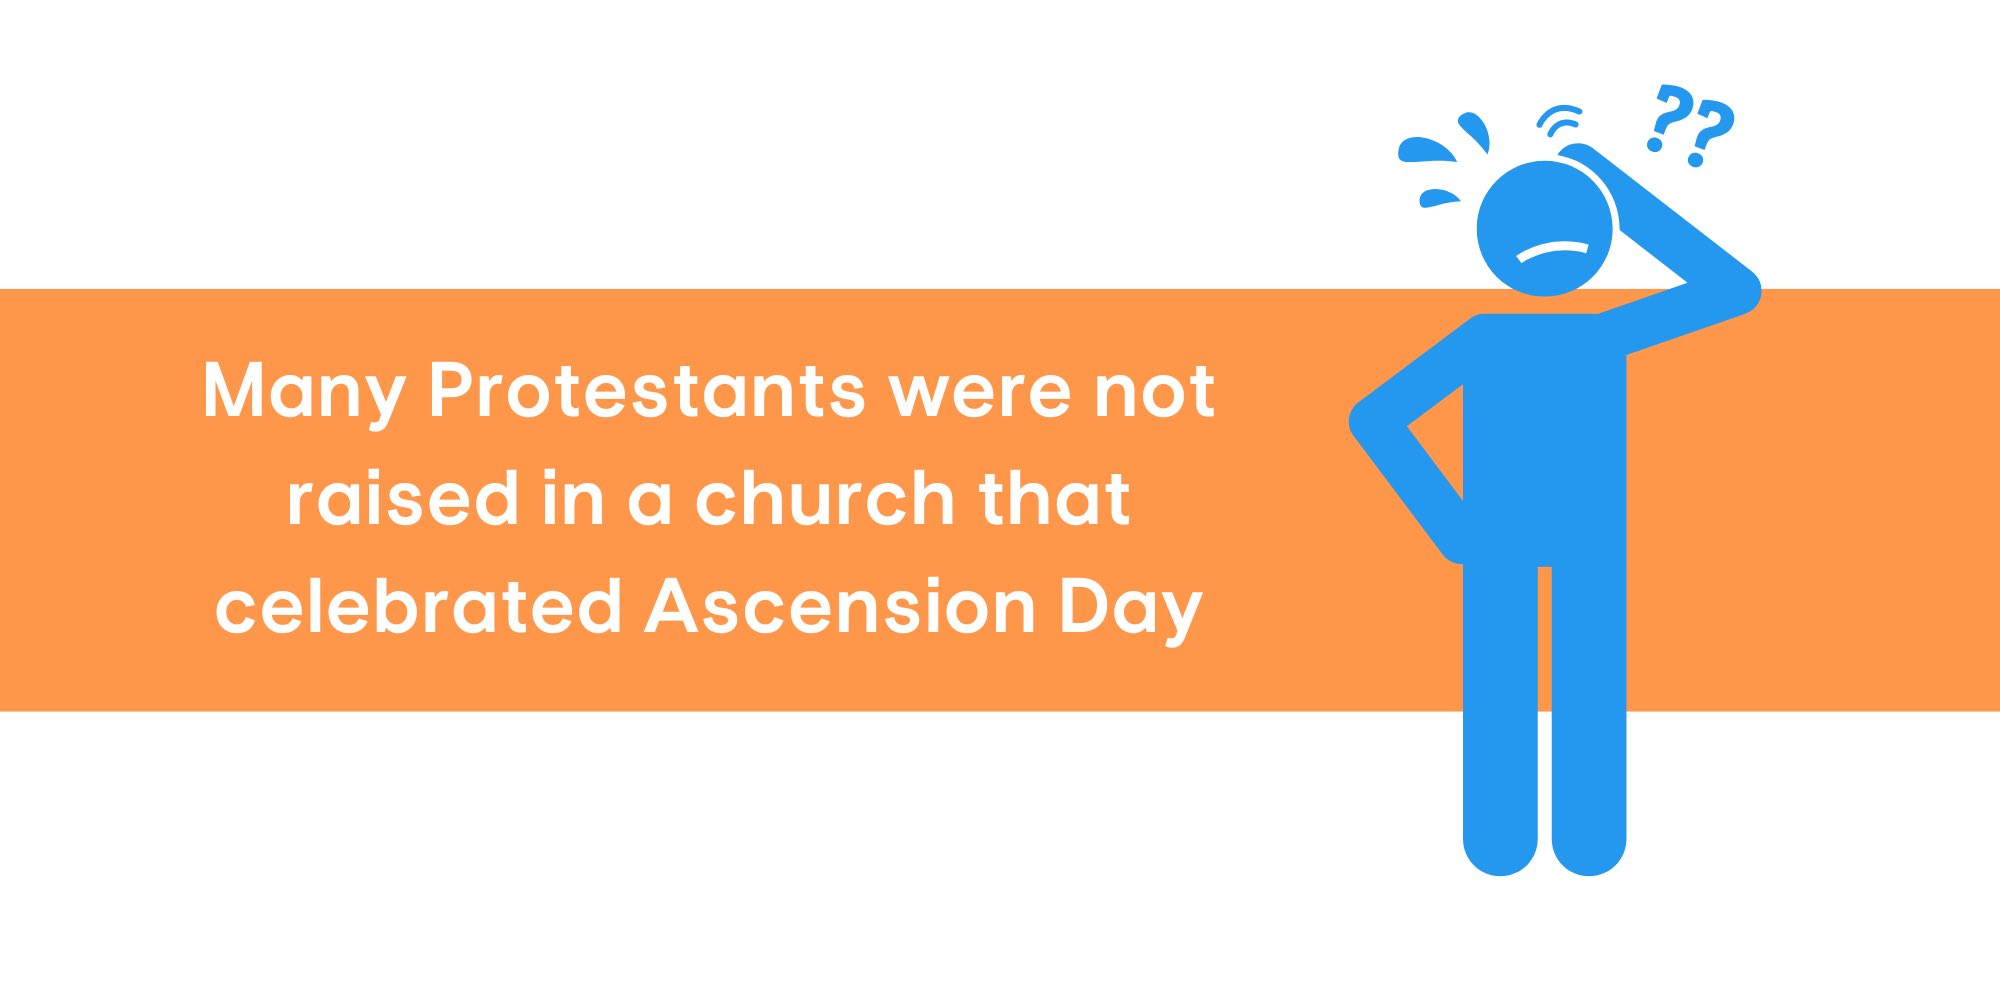 Many Protestants were not raised in a church that celebrated Ascension Day